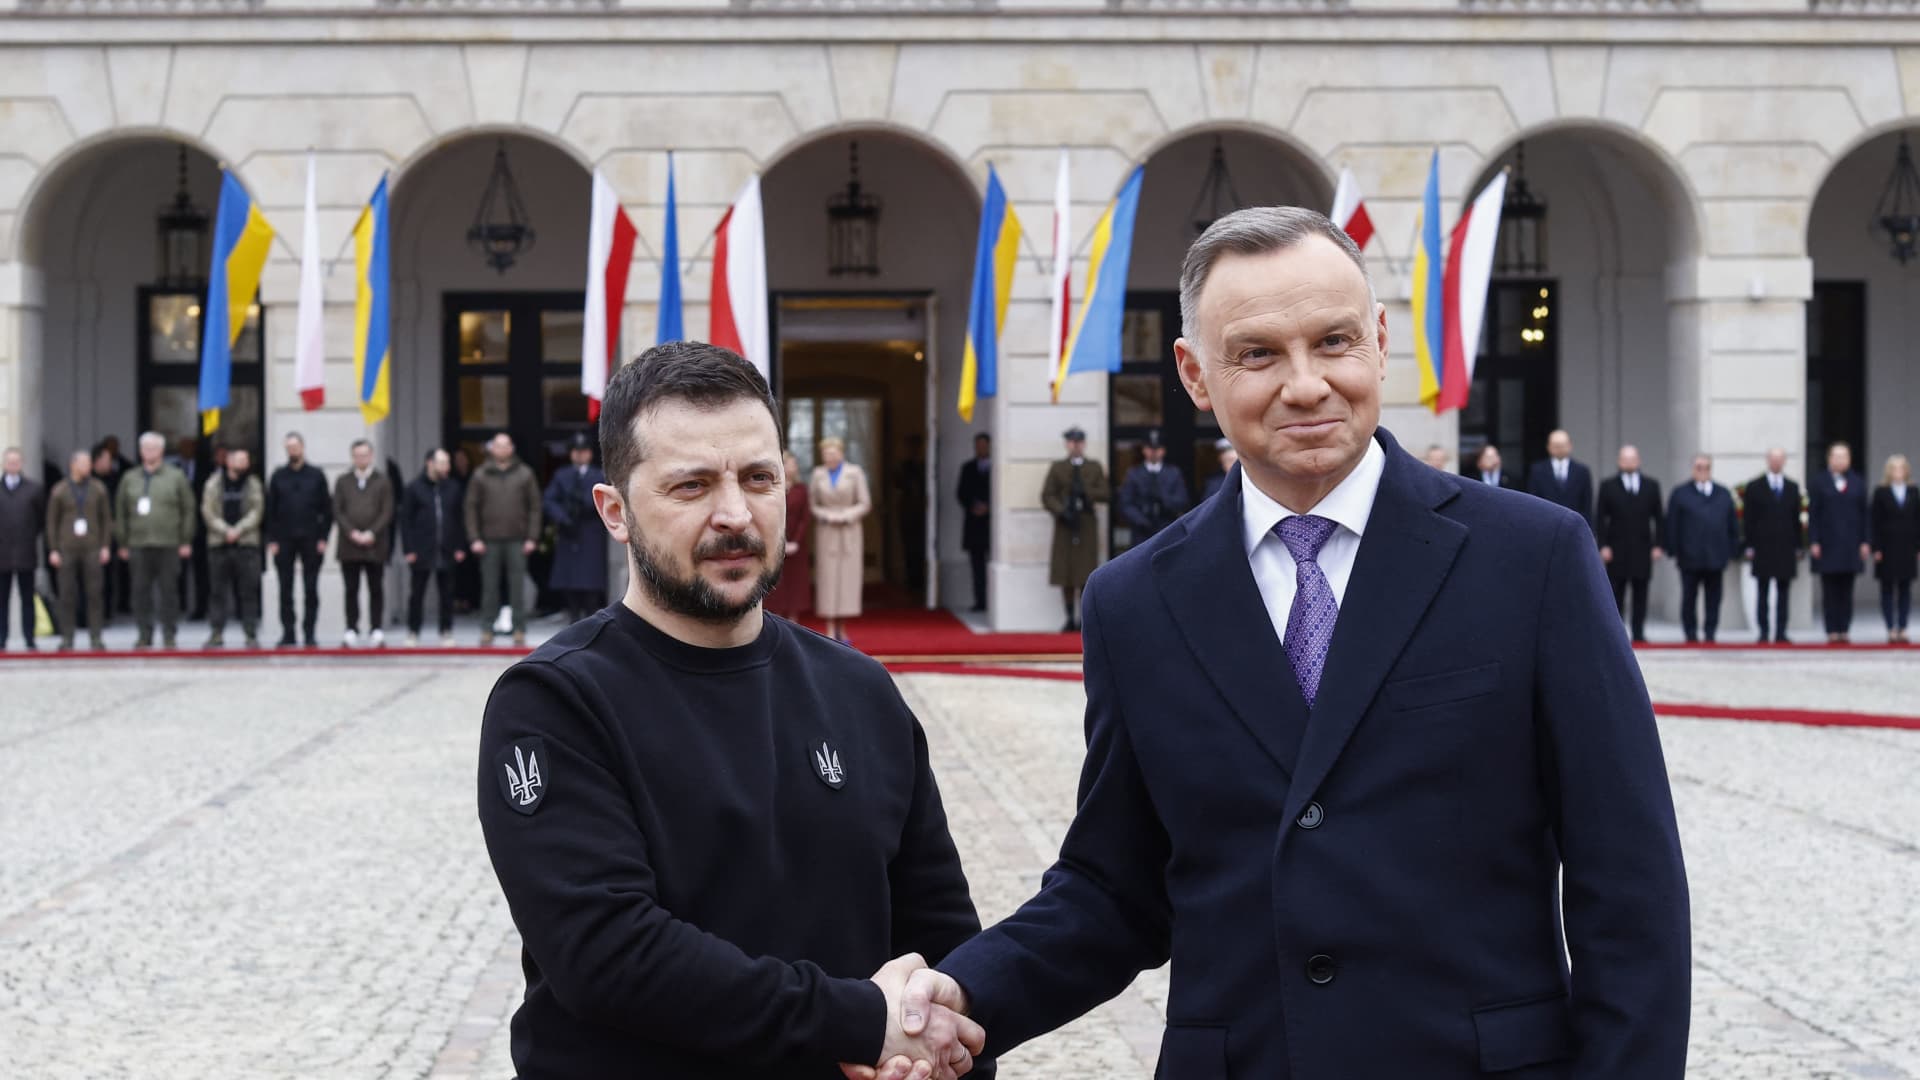 Ukraine's President Volodymyr Zelensky (L) and Polish President Andrzej Duda shake hands during a welcoming ceremony in front of the presidential palace in Warsaw, Poland, on April 5, 2023.